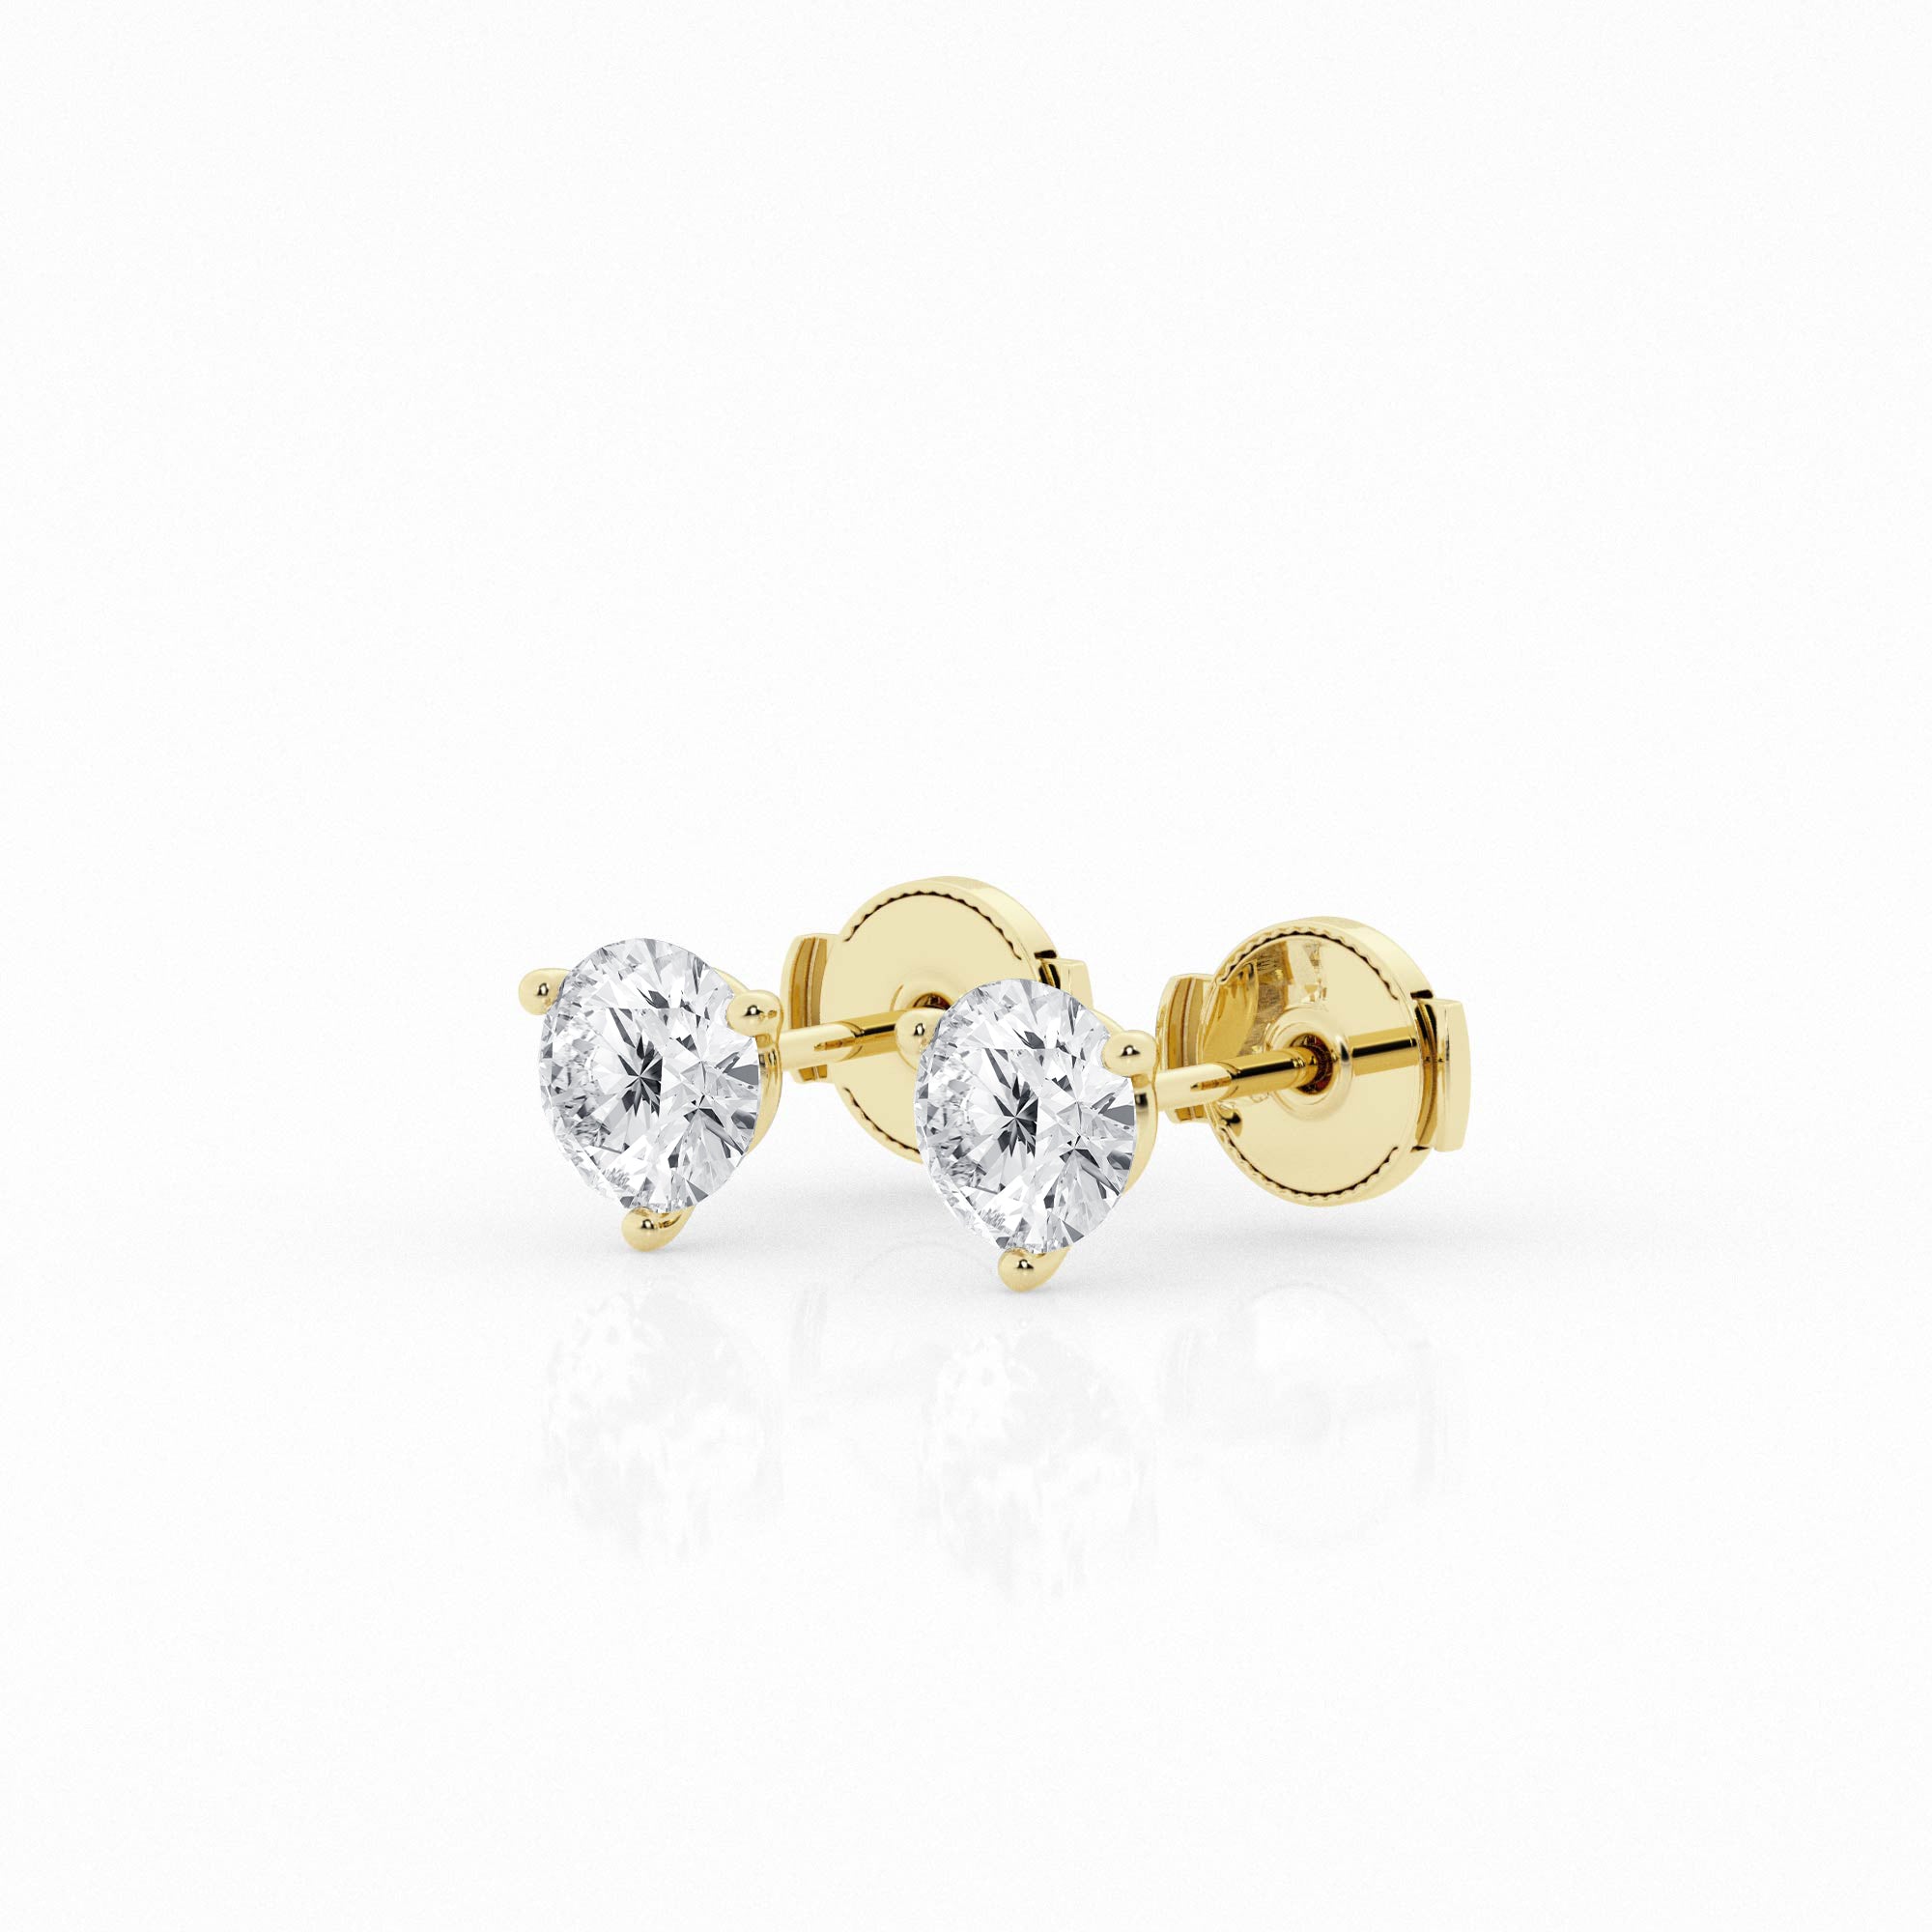 Yellow gold stud earrings adorned with 1.5 carat lab-grown round diamonds, side view